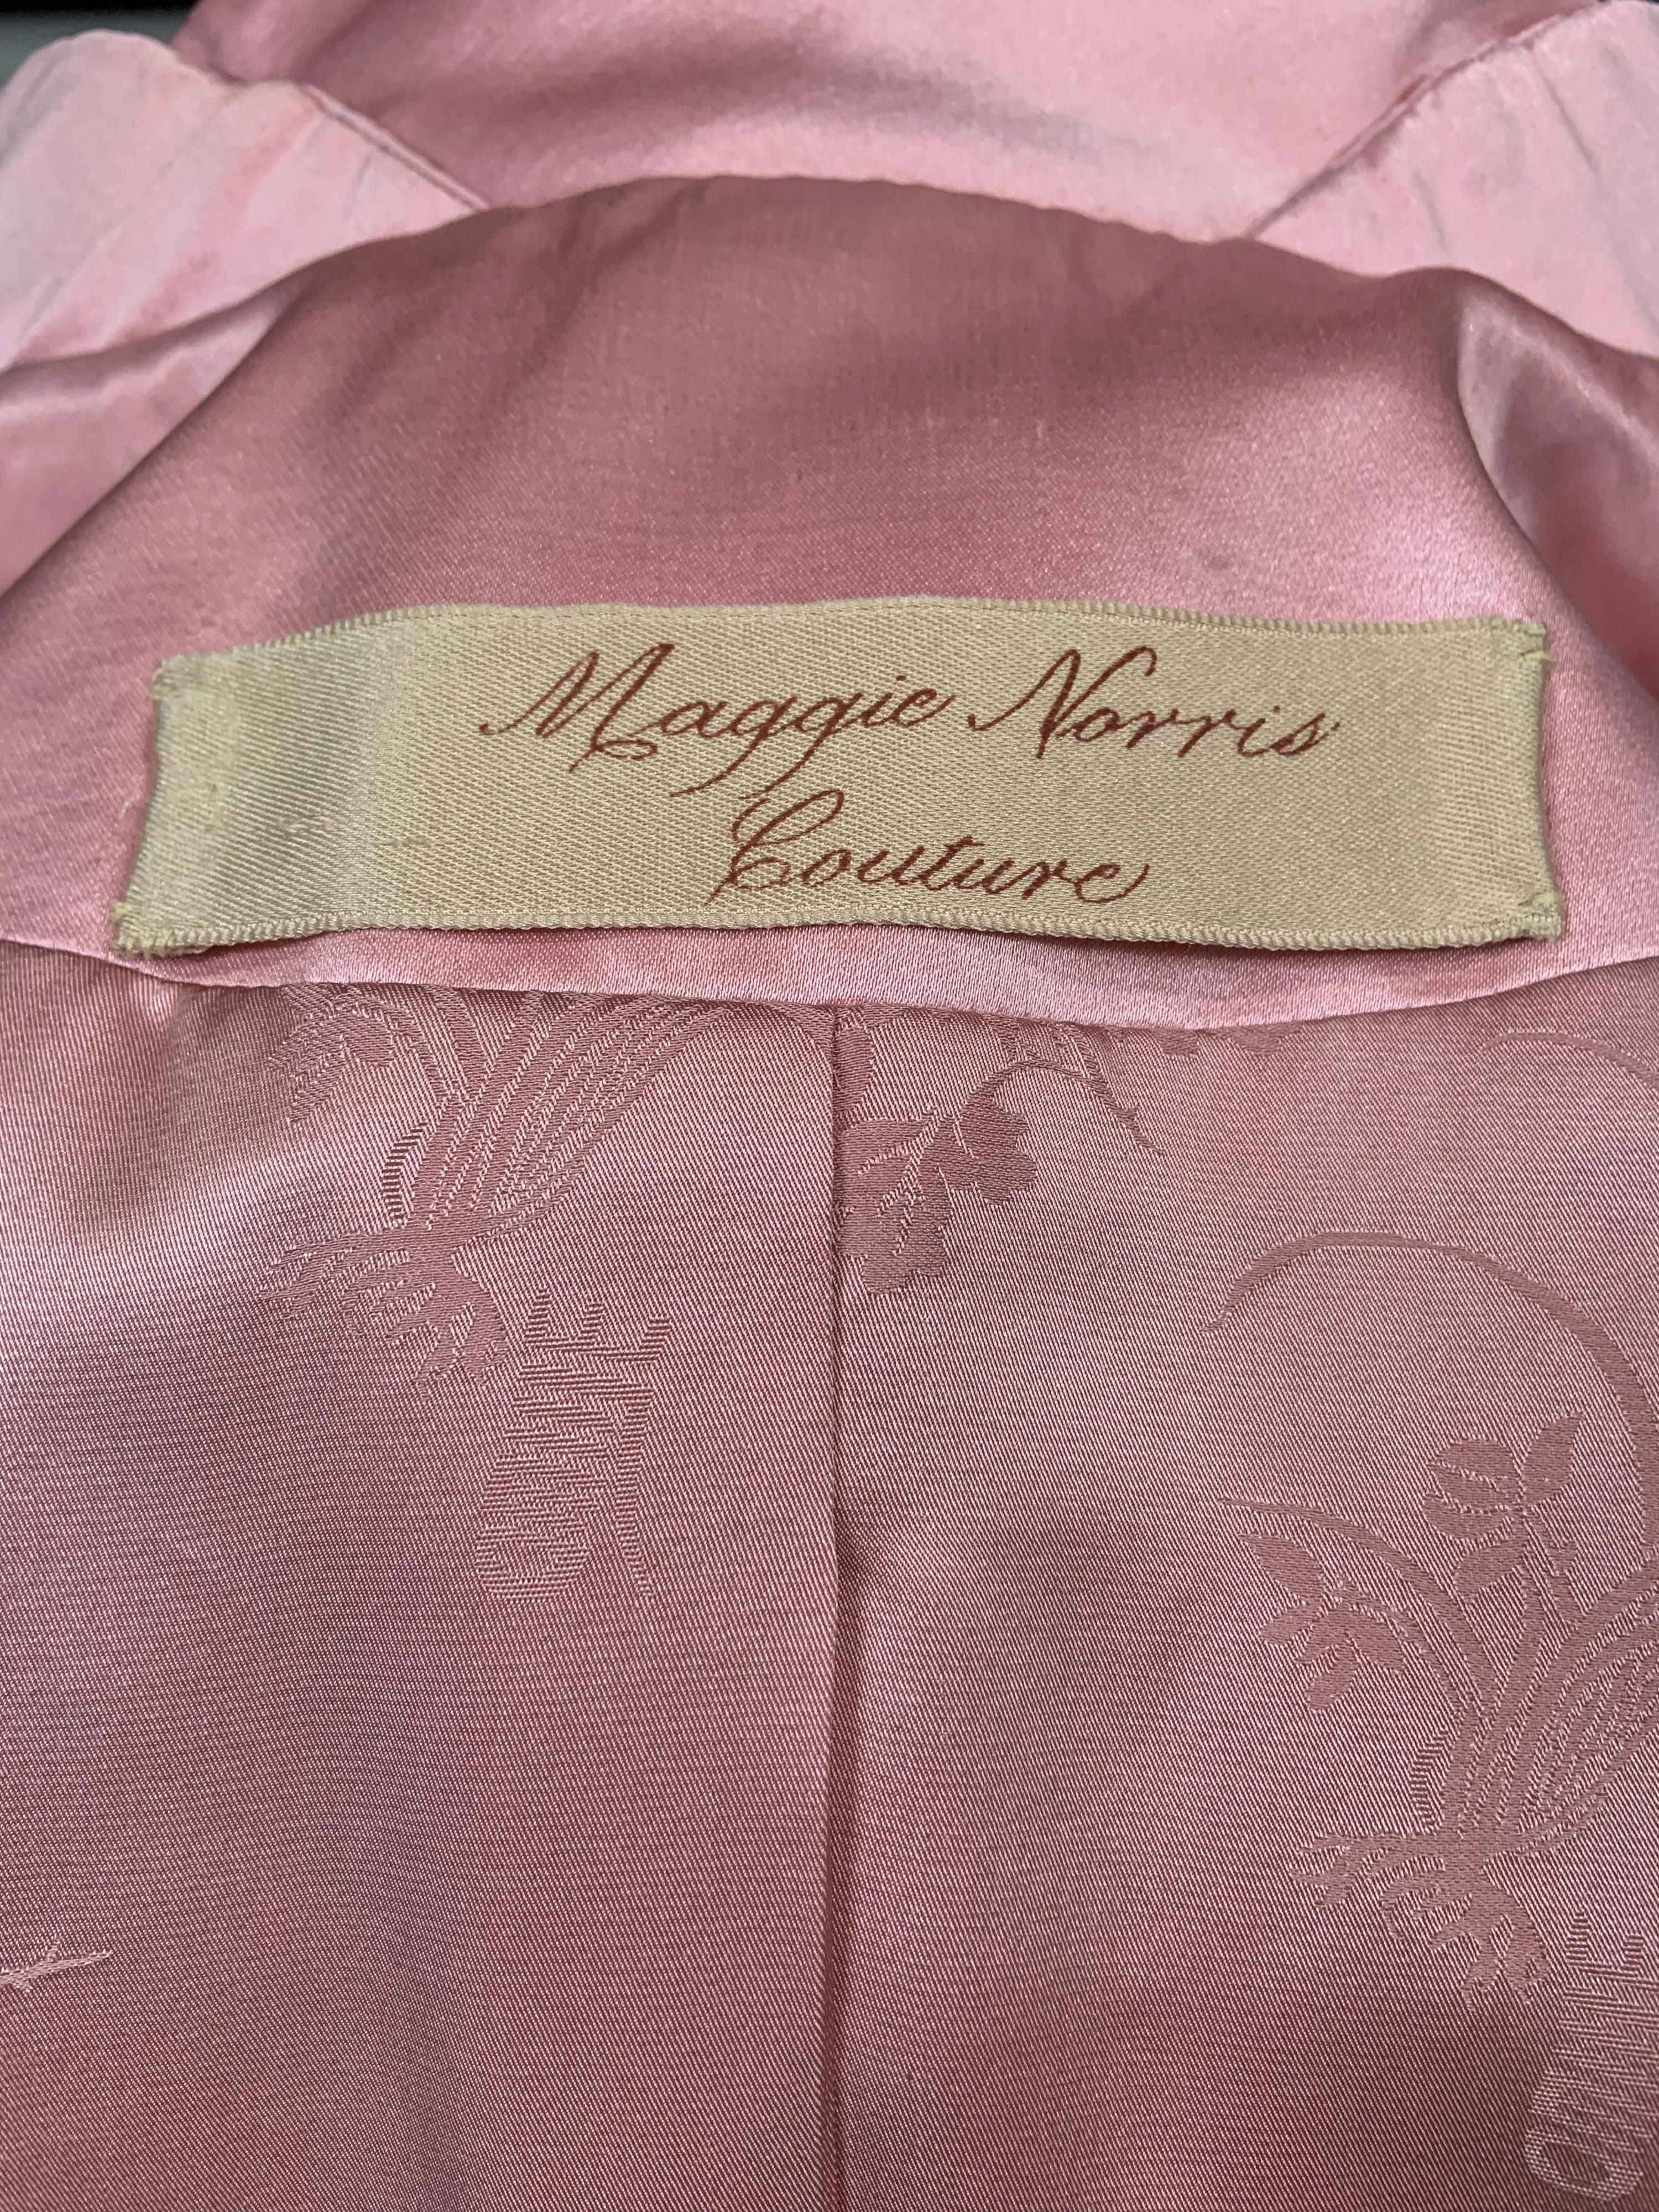 Maggie Norris Couture Pink Silk Satin Jacket For Sale 2